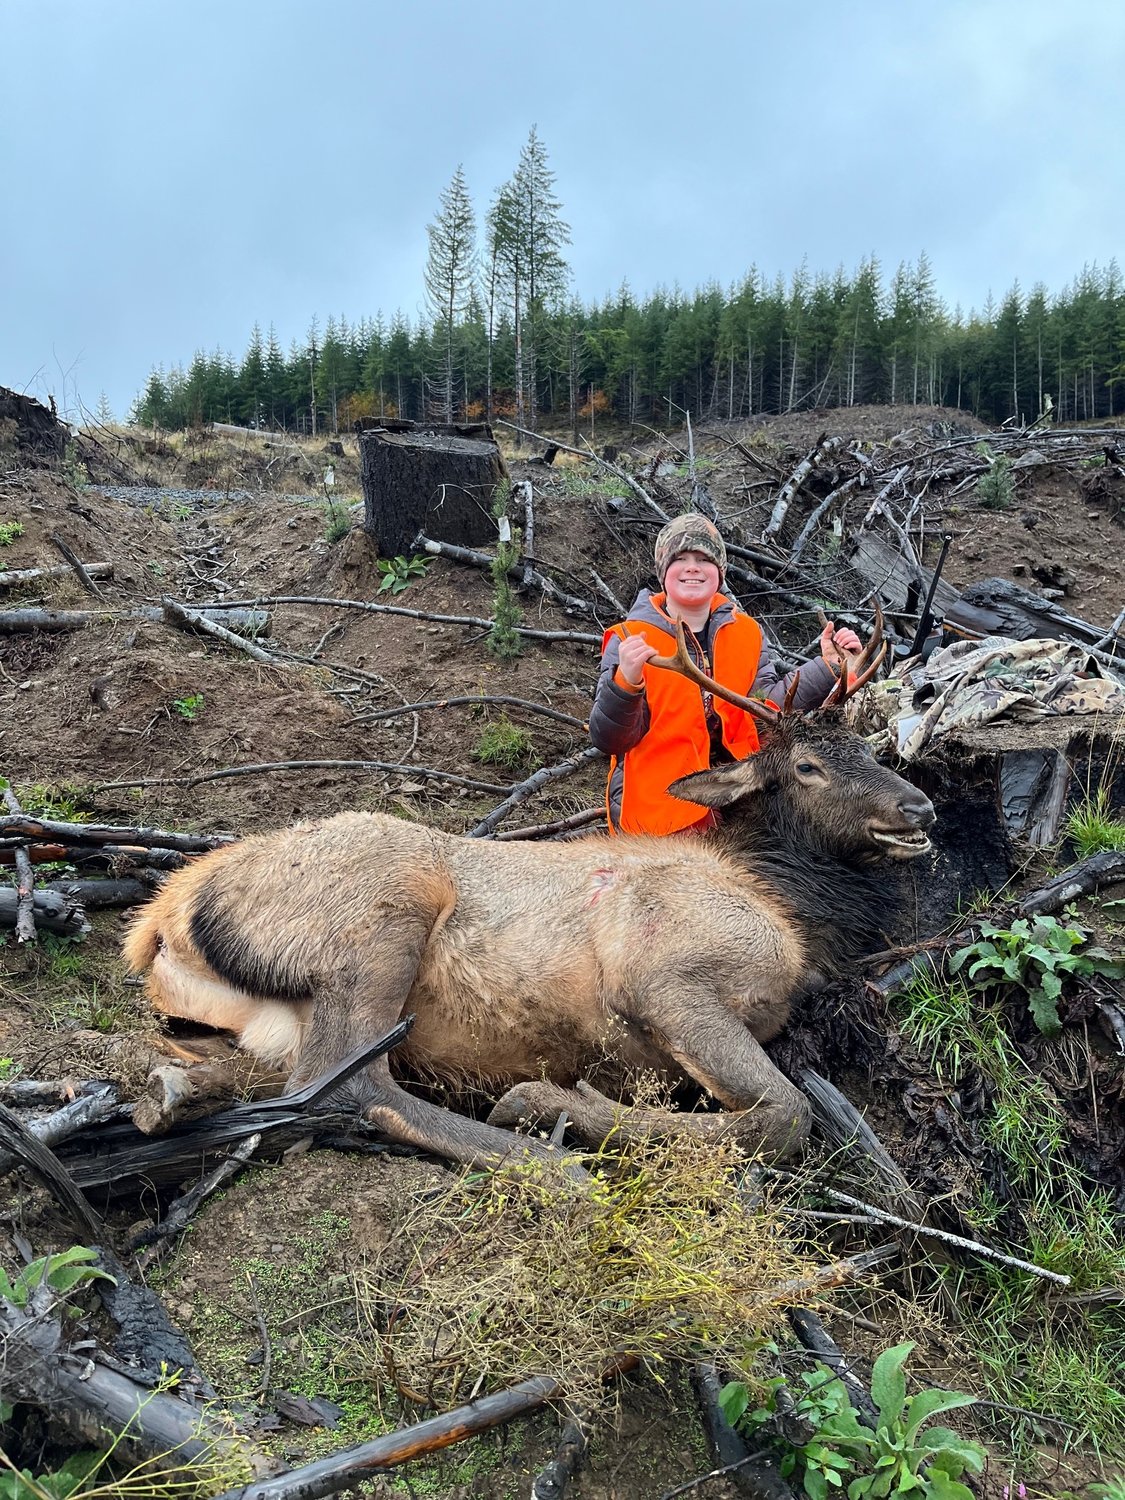 "Here is a picture of my grandson’s first elk. Carter Smith, age 11, got his first bull elk while hunting near Boistfort on Nov. 6." — Matthew Moses